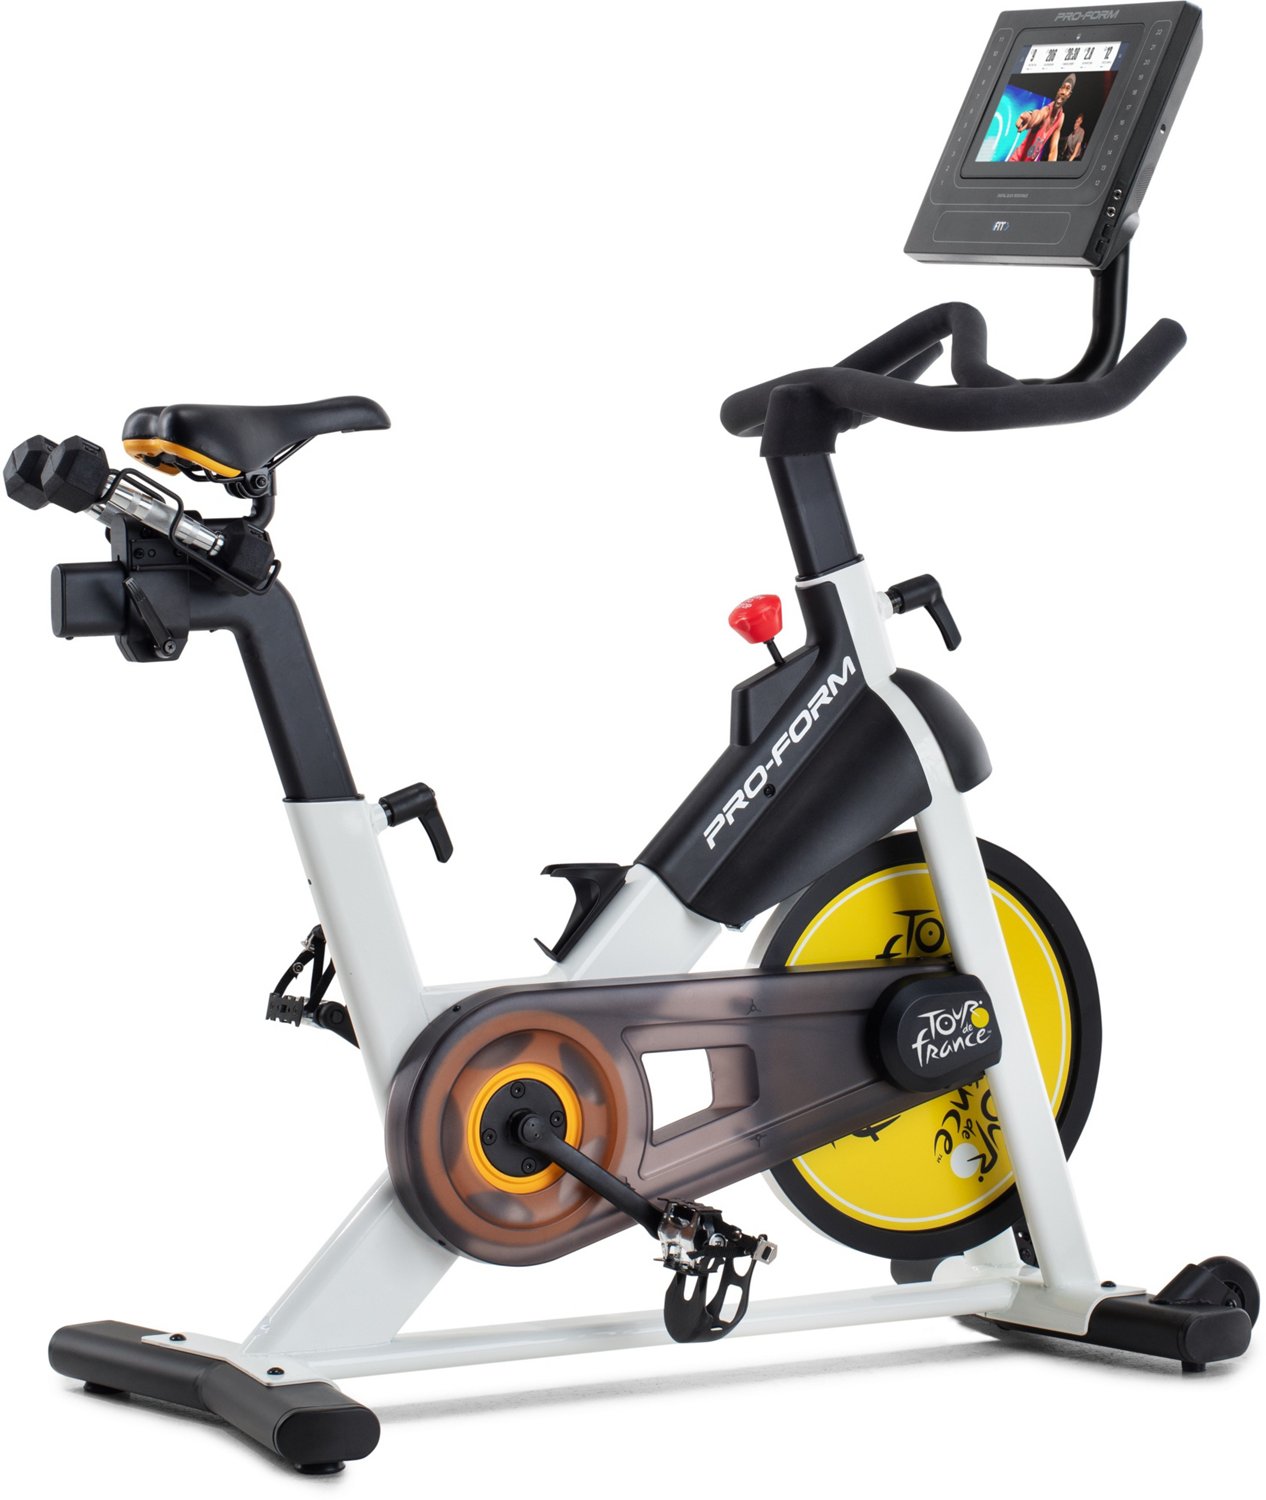 pro-form bike - Proform 500 SPX Indoor Cycle (Brand New, Built and Tuned